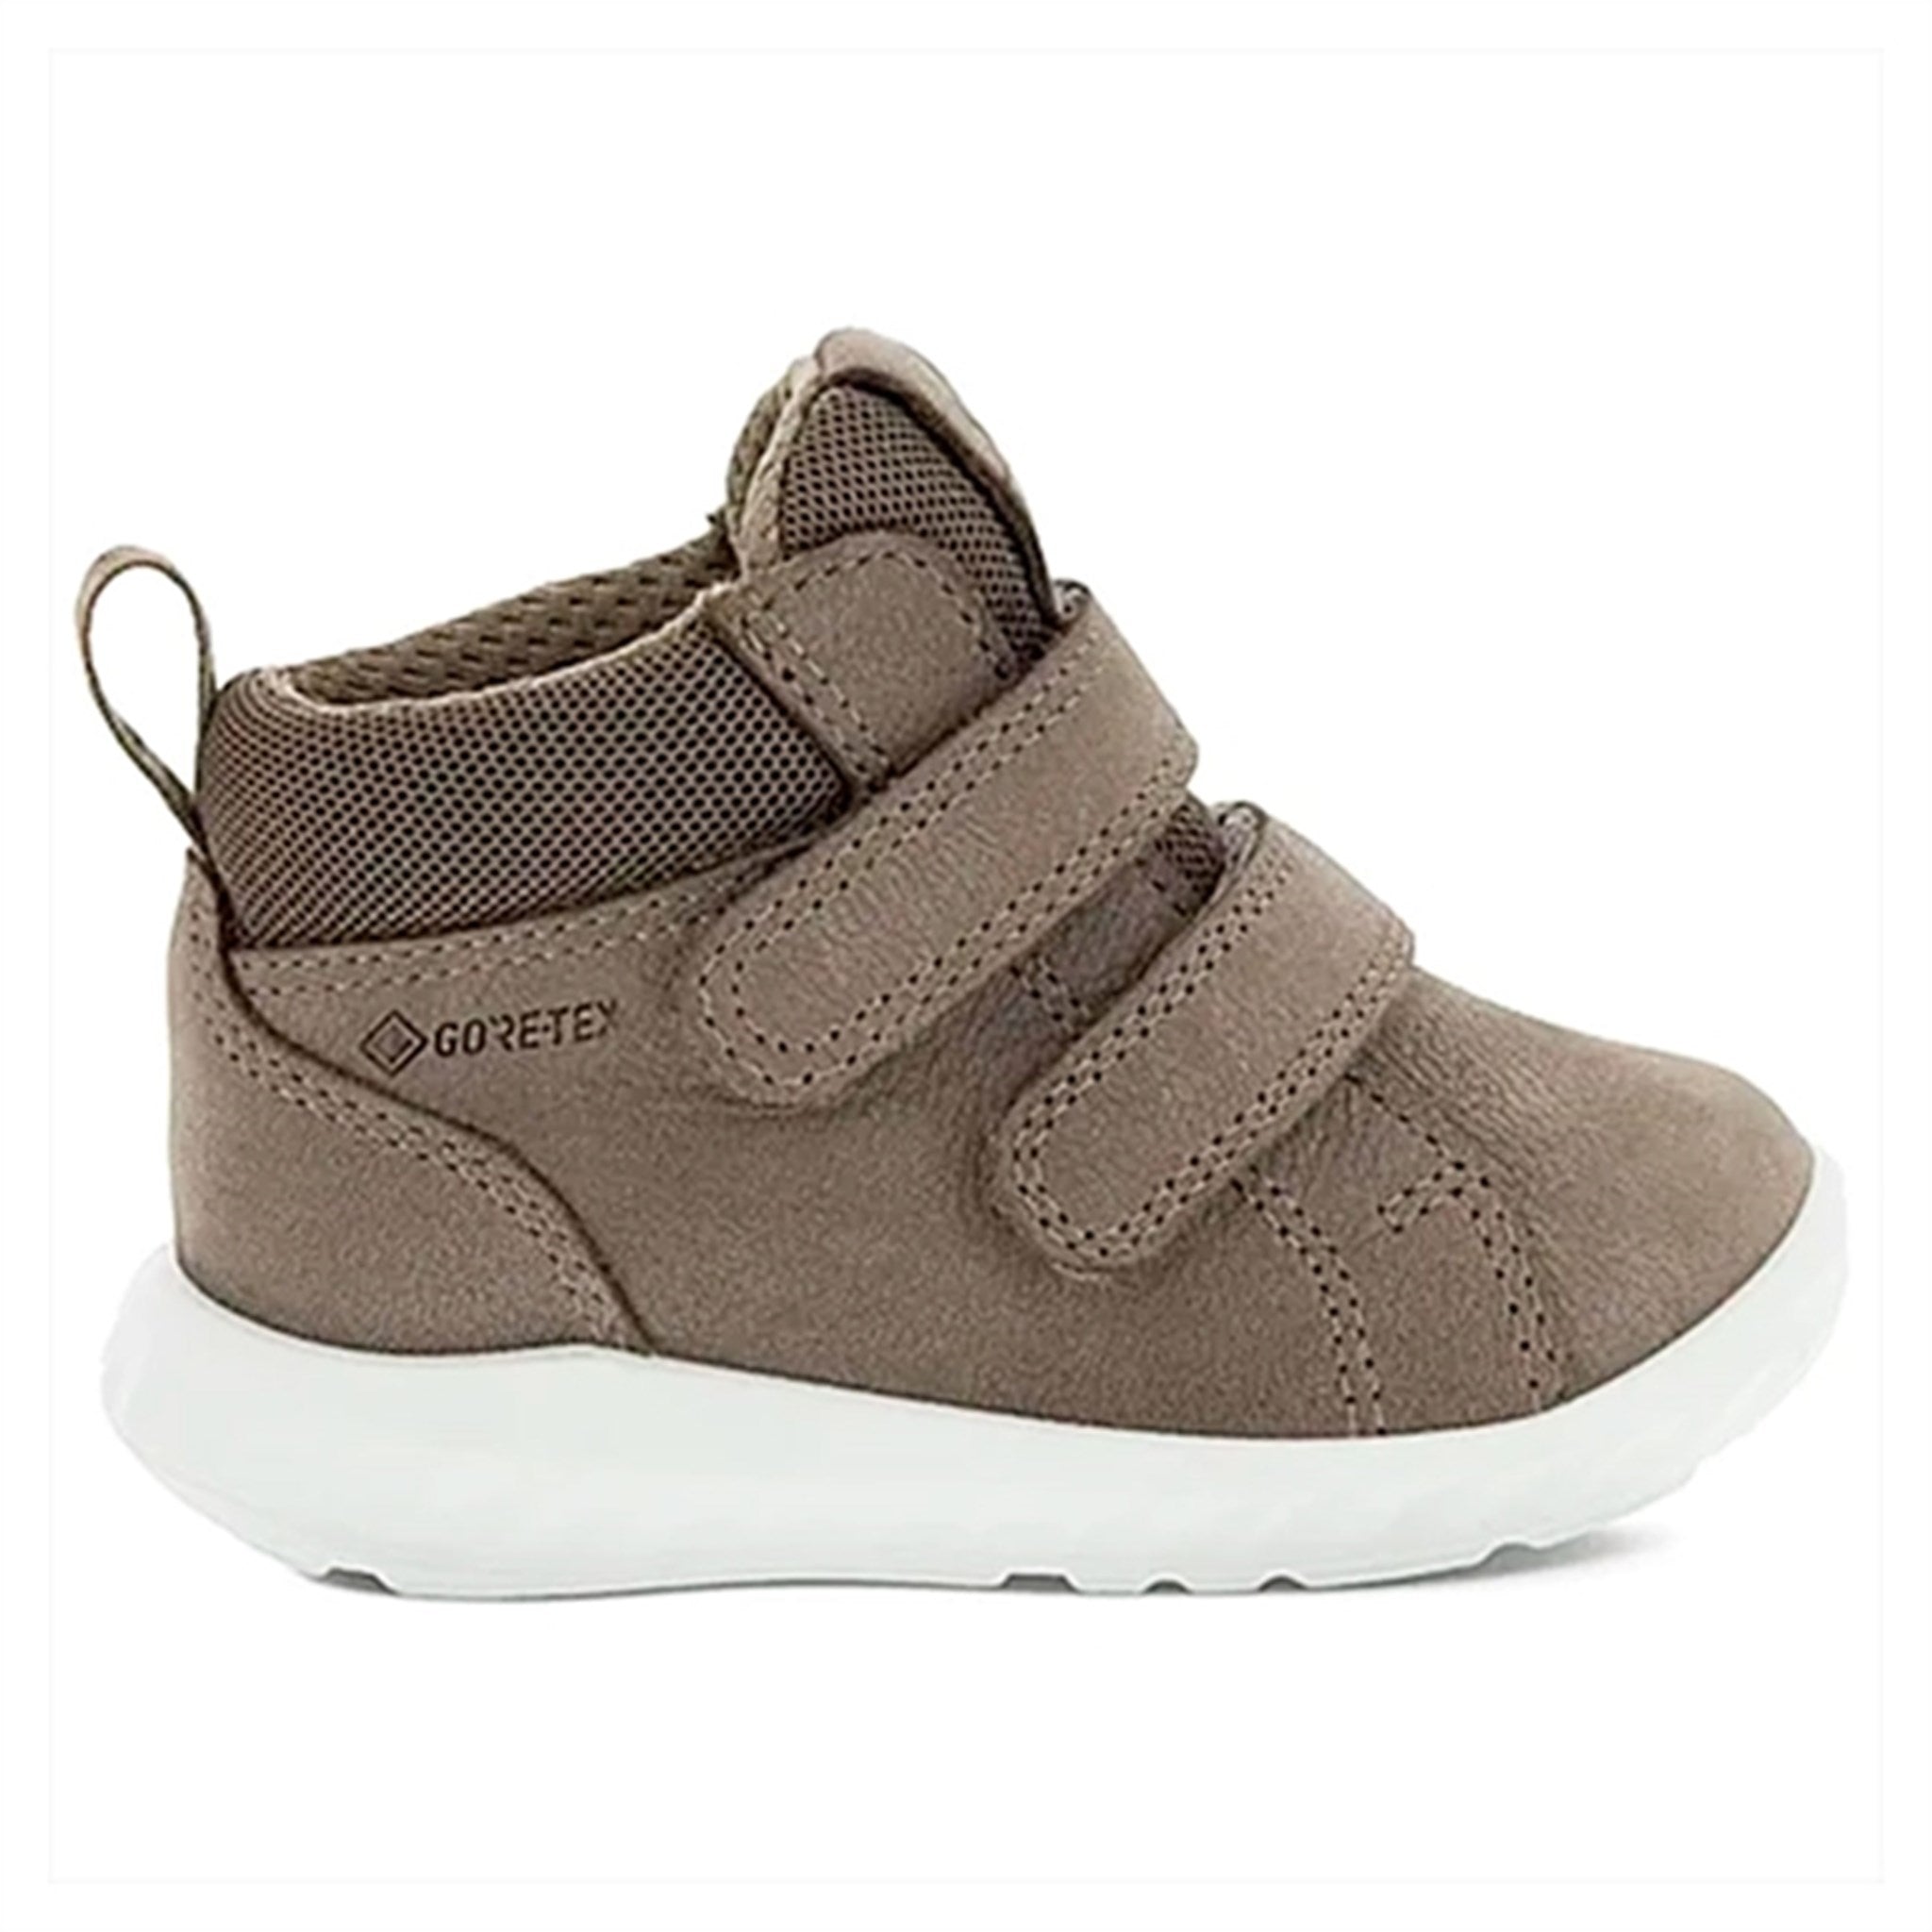 Ecco Lite Infant Ankle Bo Boot Taupe/Taupe 2